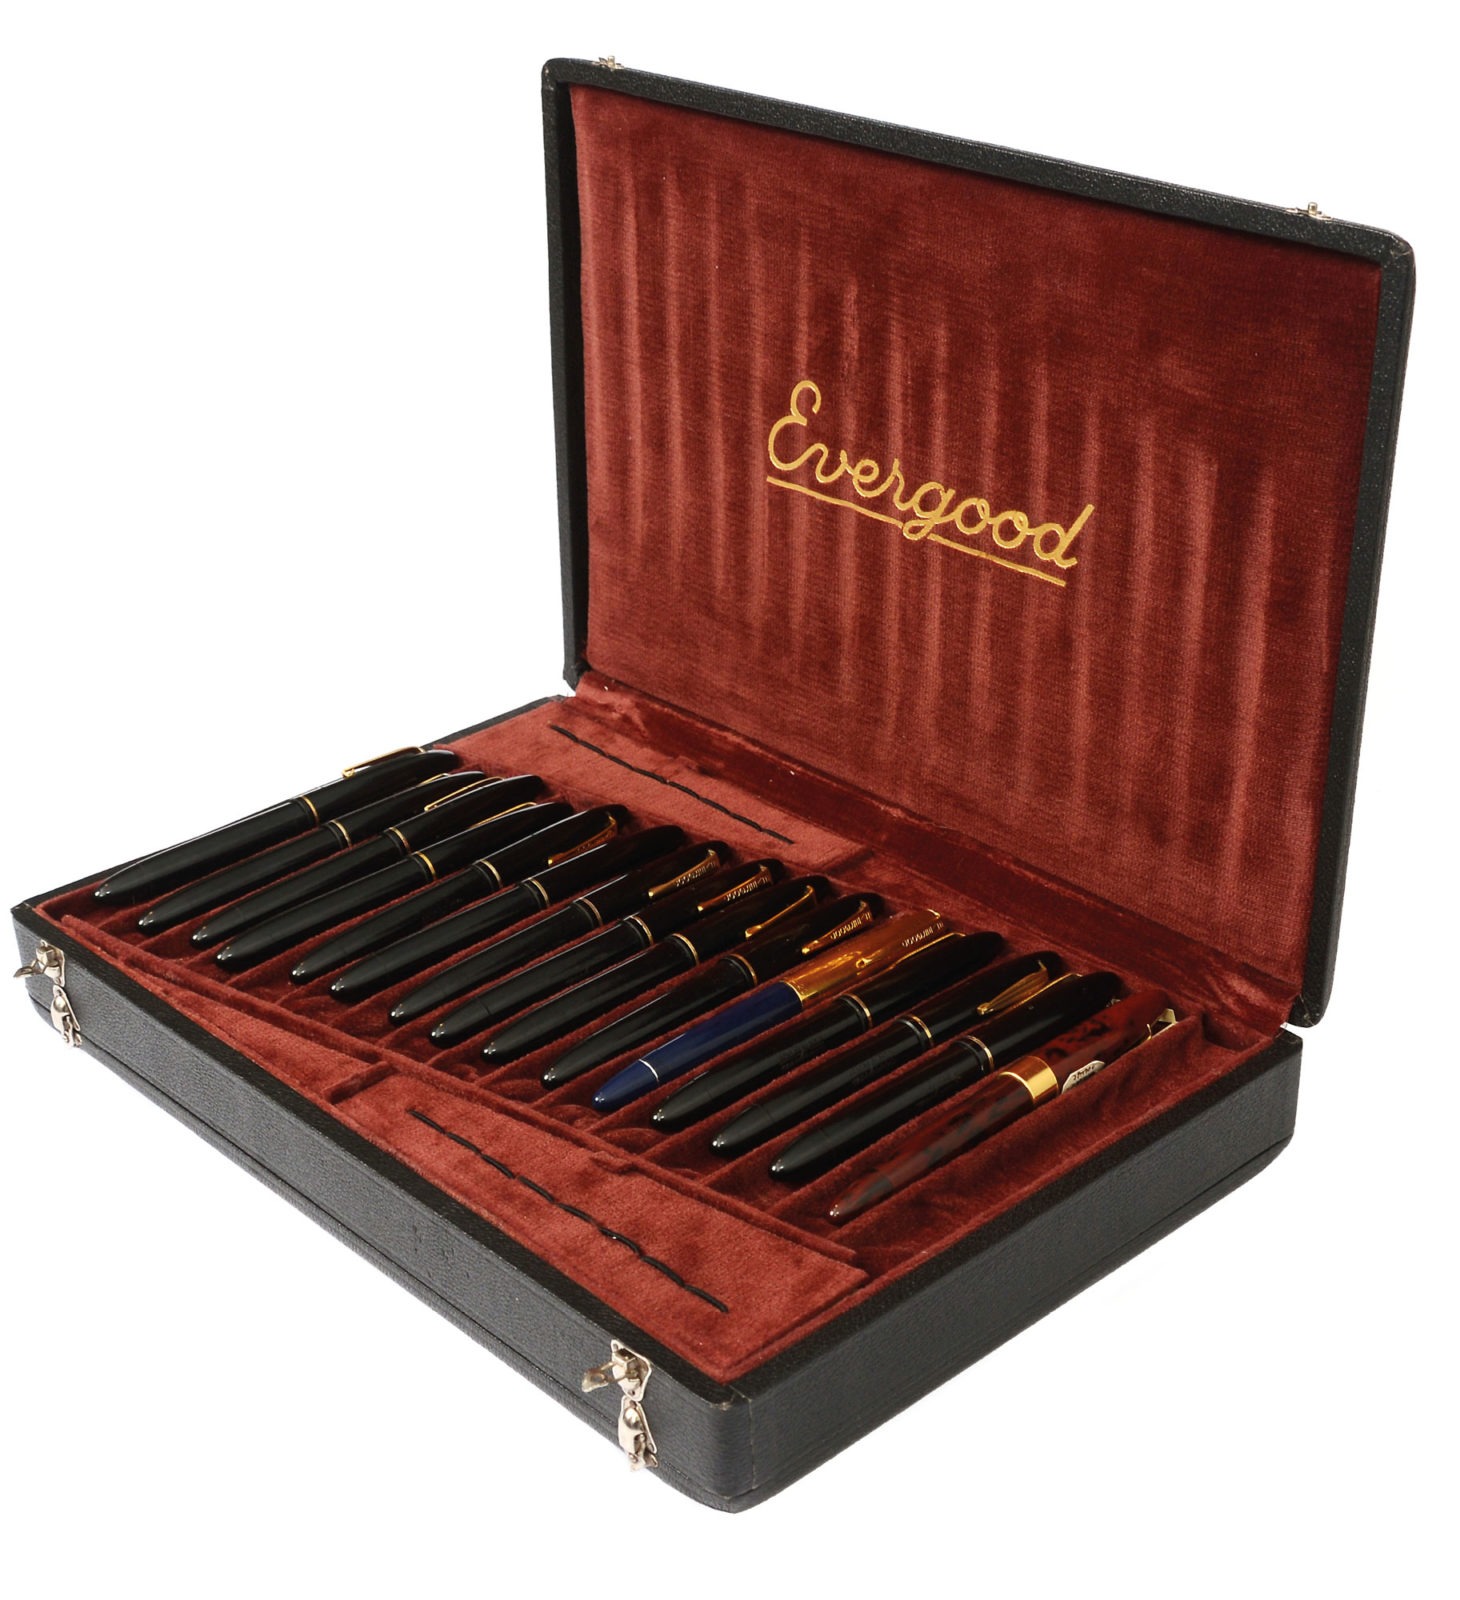 Opened vintage pen salesman sample case, brown with red velvet lining, filled with black ballpoint pens.